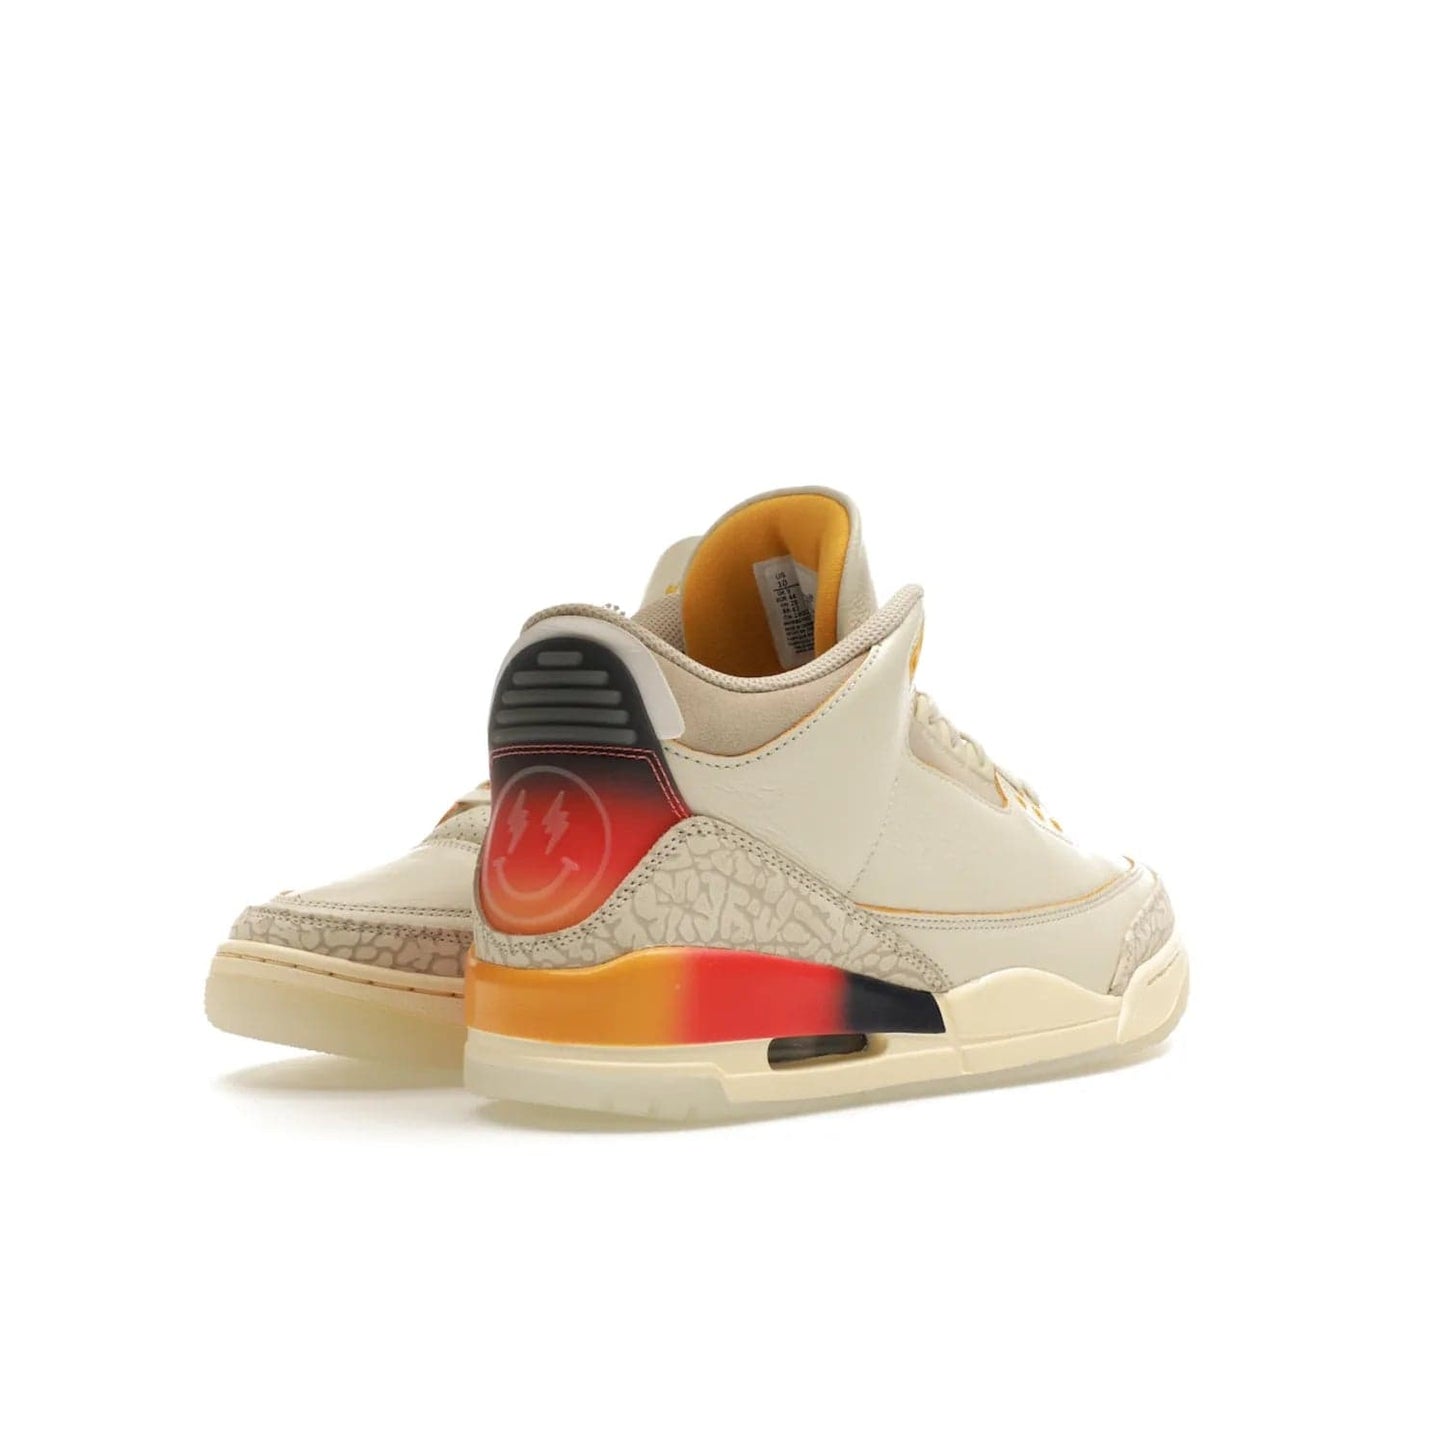 Jordan 3 Retro SP J Balvin Medellín Sunset - Image 32 - Only at www.BallersClubKickz.com - J Balvin x Jordan 3 Retro SP: Celebrate the joy of life with a colorful, homage to the electrifying reggaeton culture and iconic Jordan 3. Limited edition, Sept. 23. $250.